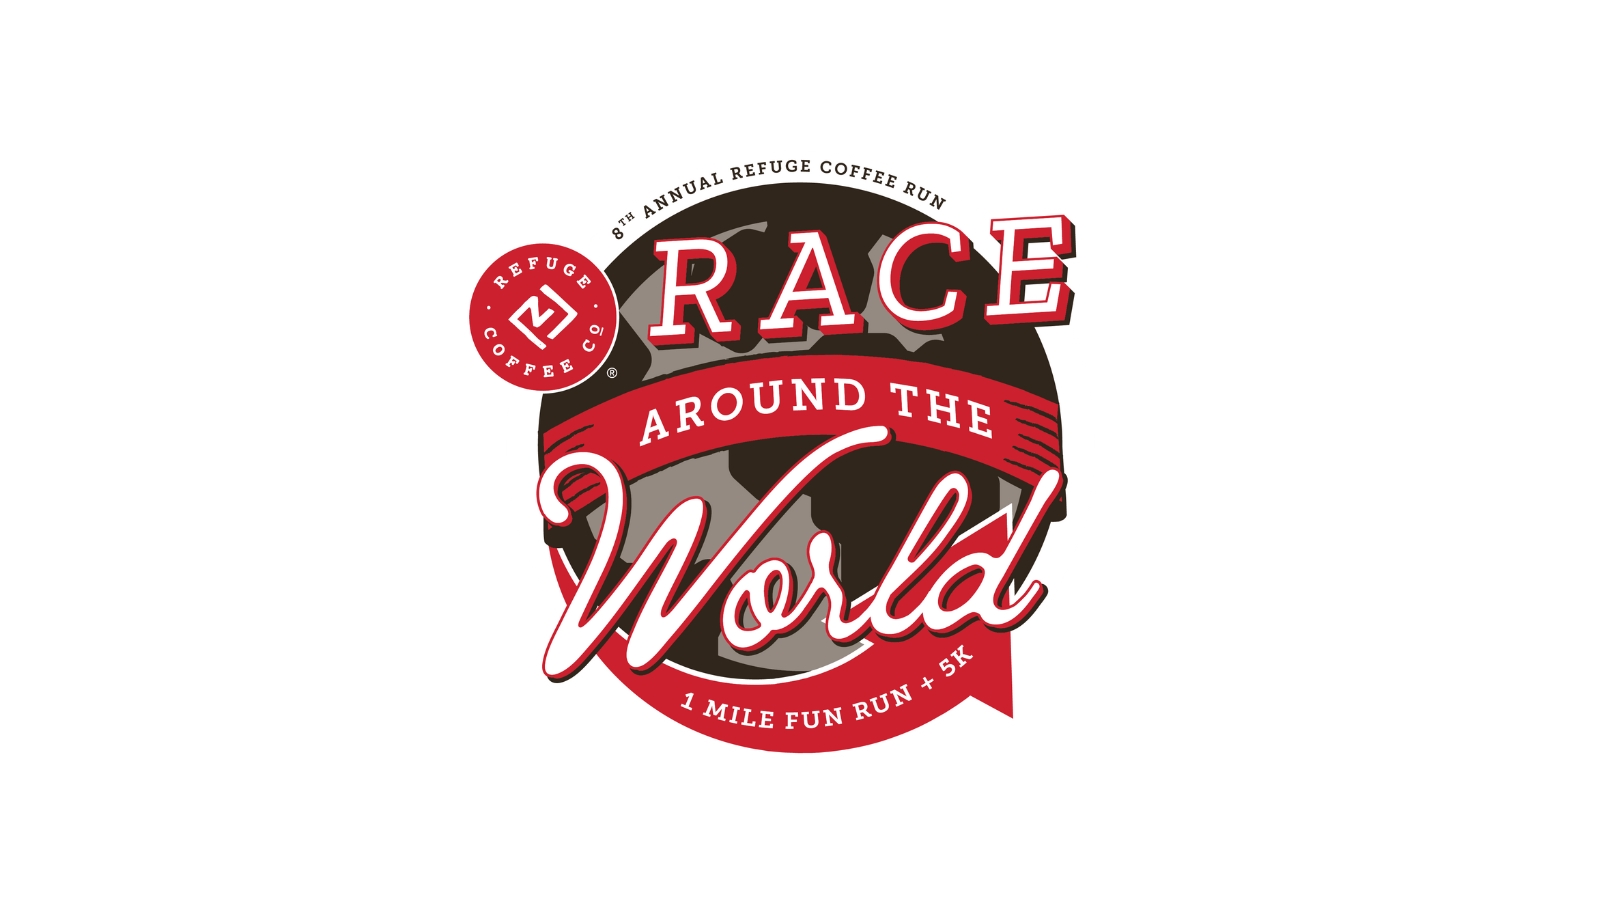 5k Race around the World and Mile Fun run cover image